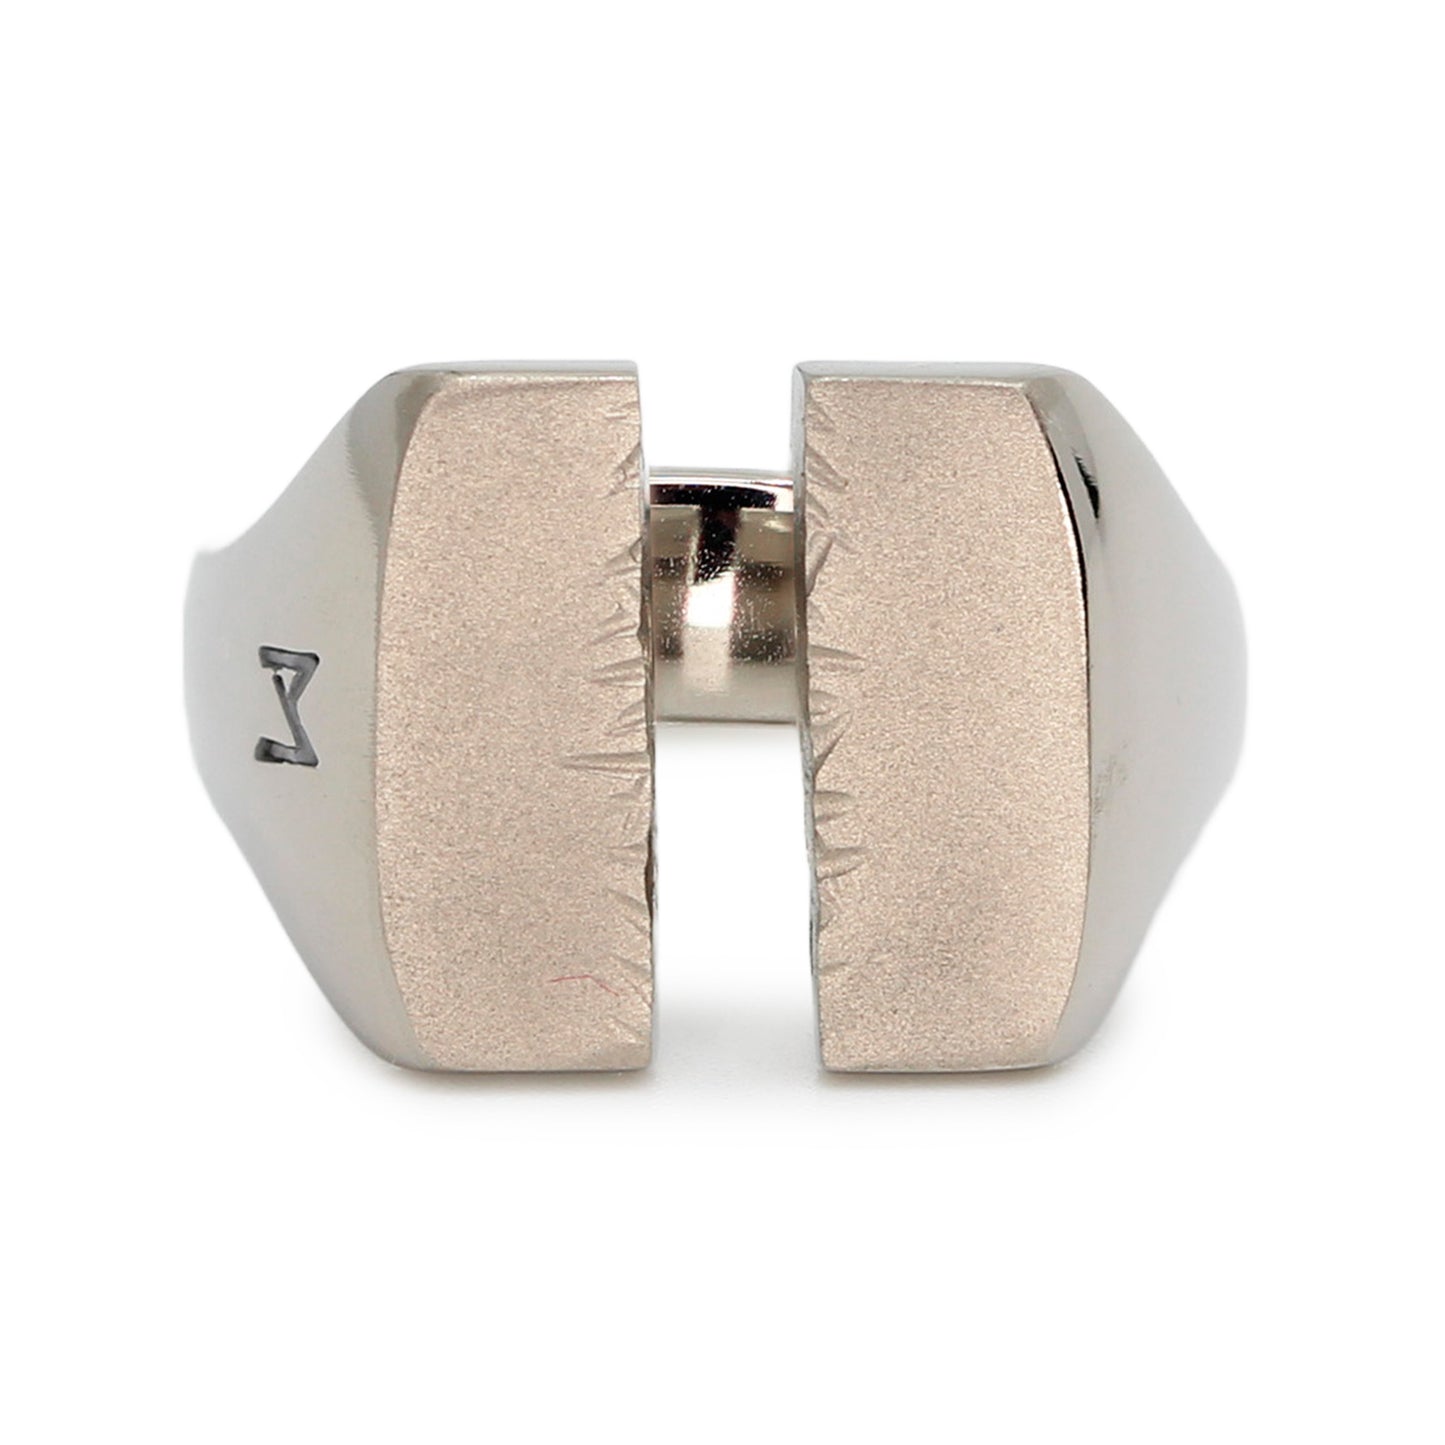 Single silver-colored titanium signet ring, 15x15 mm wide surface which has been cut through the middle. Image shows front view of the ring